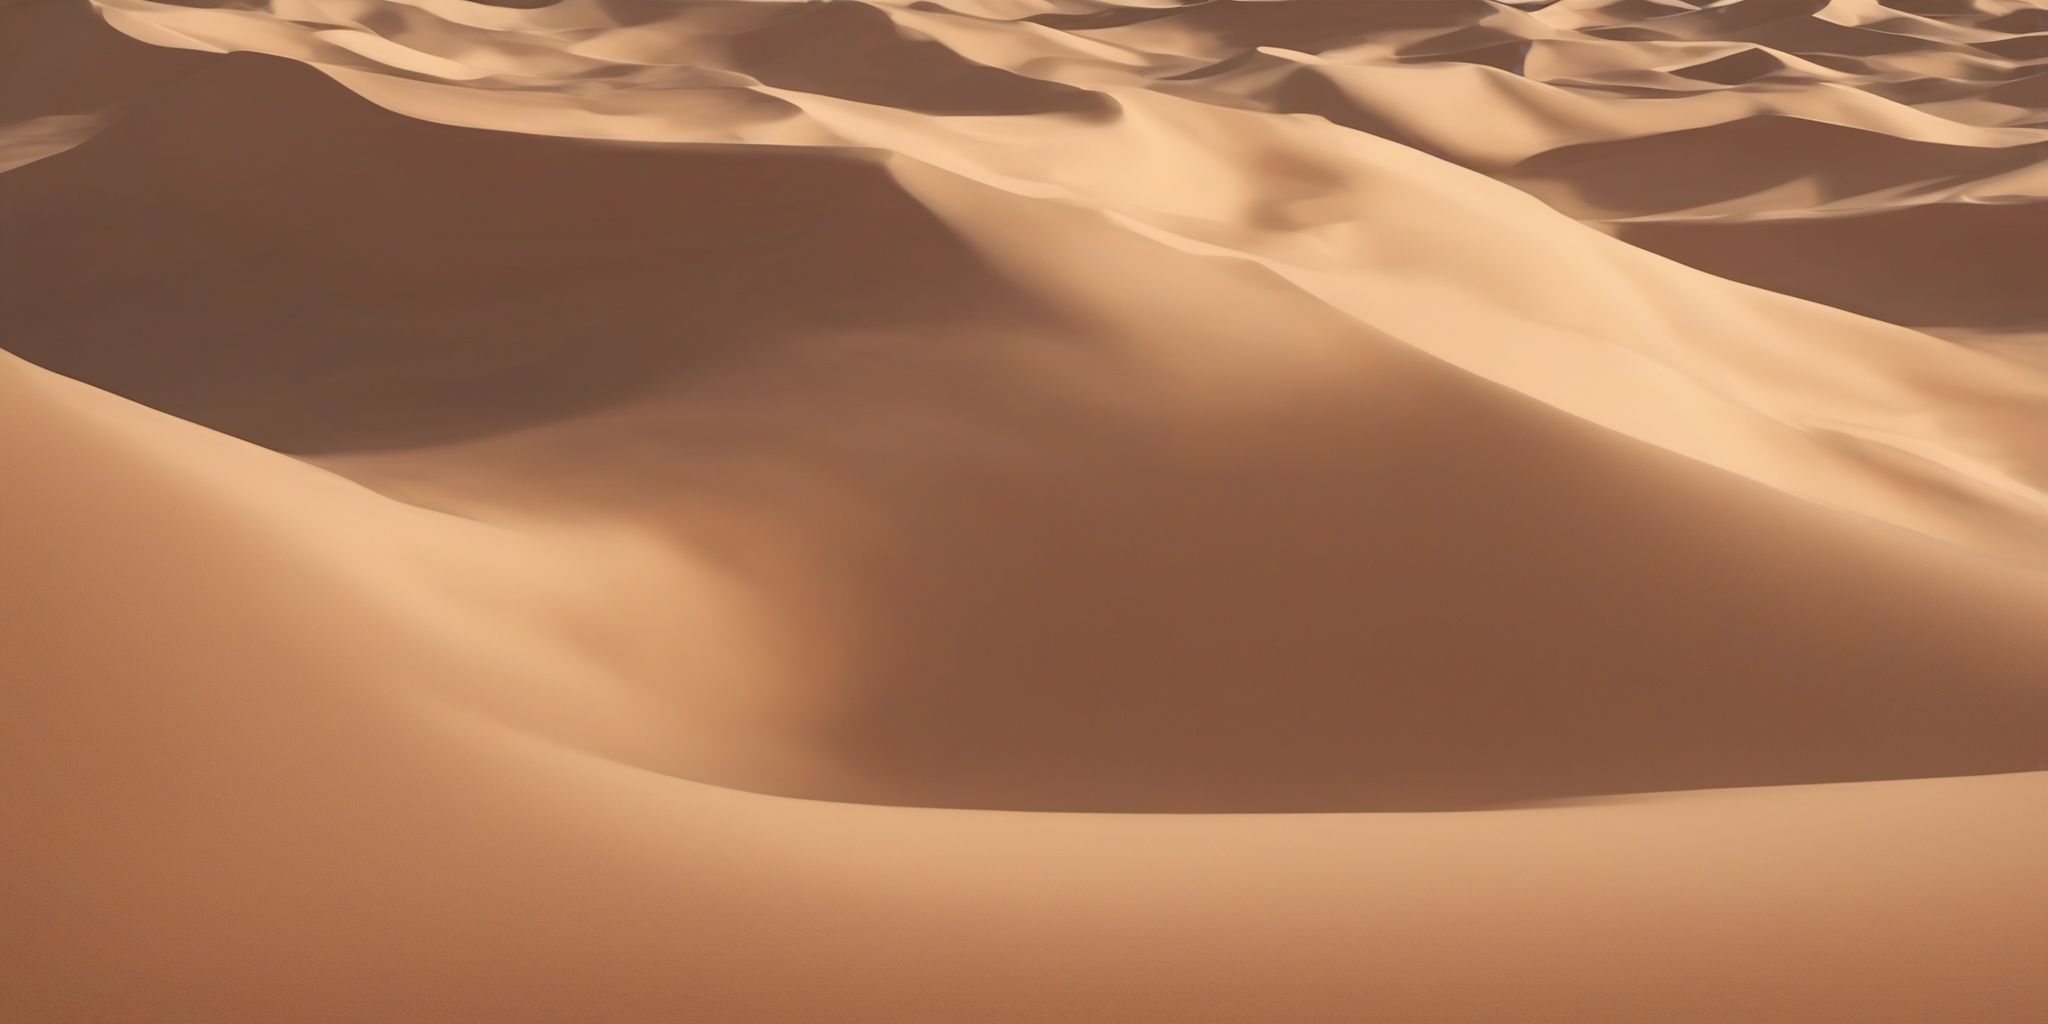 Desert sand  in realistic, photographic style